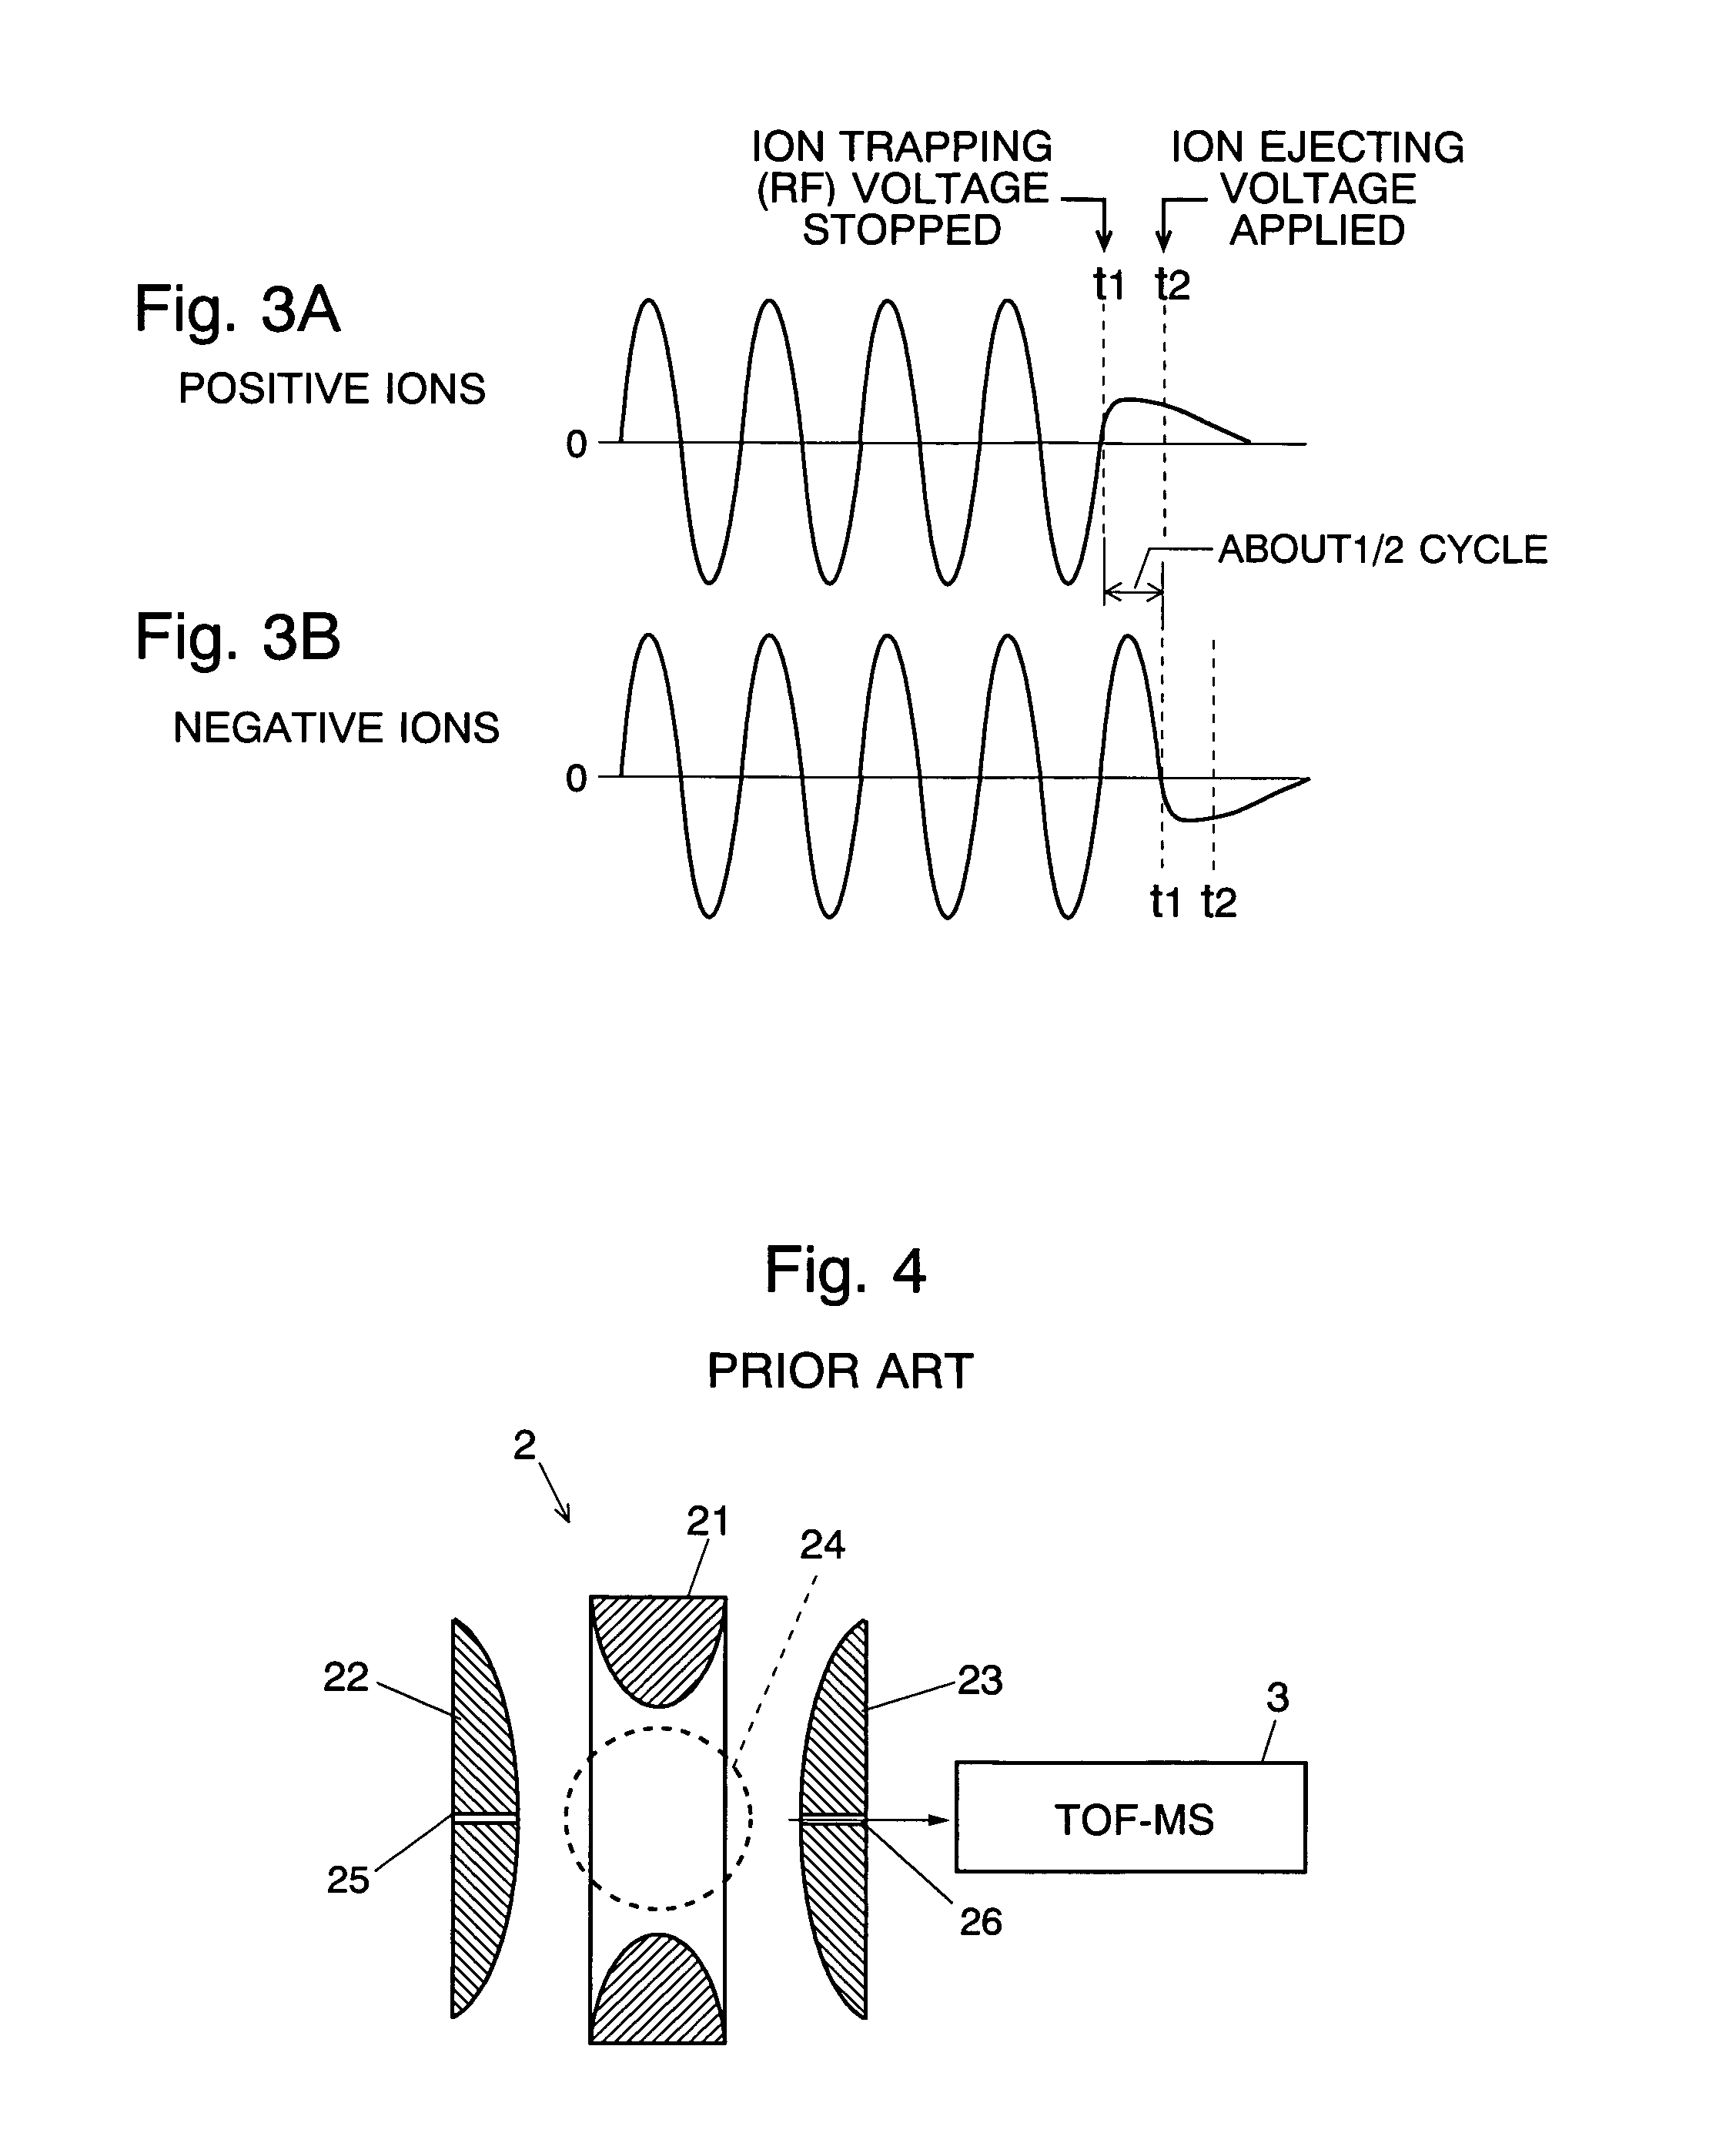 Mass spectrometer with an ion trap